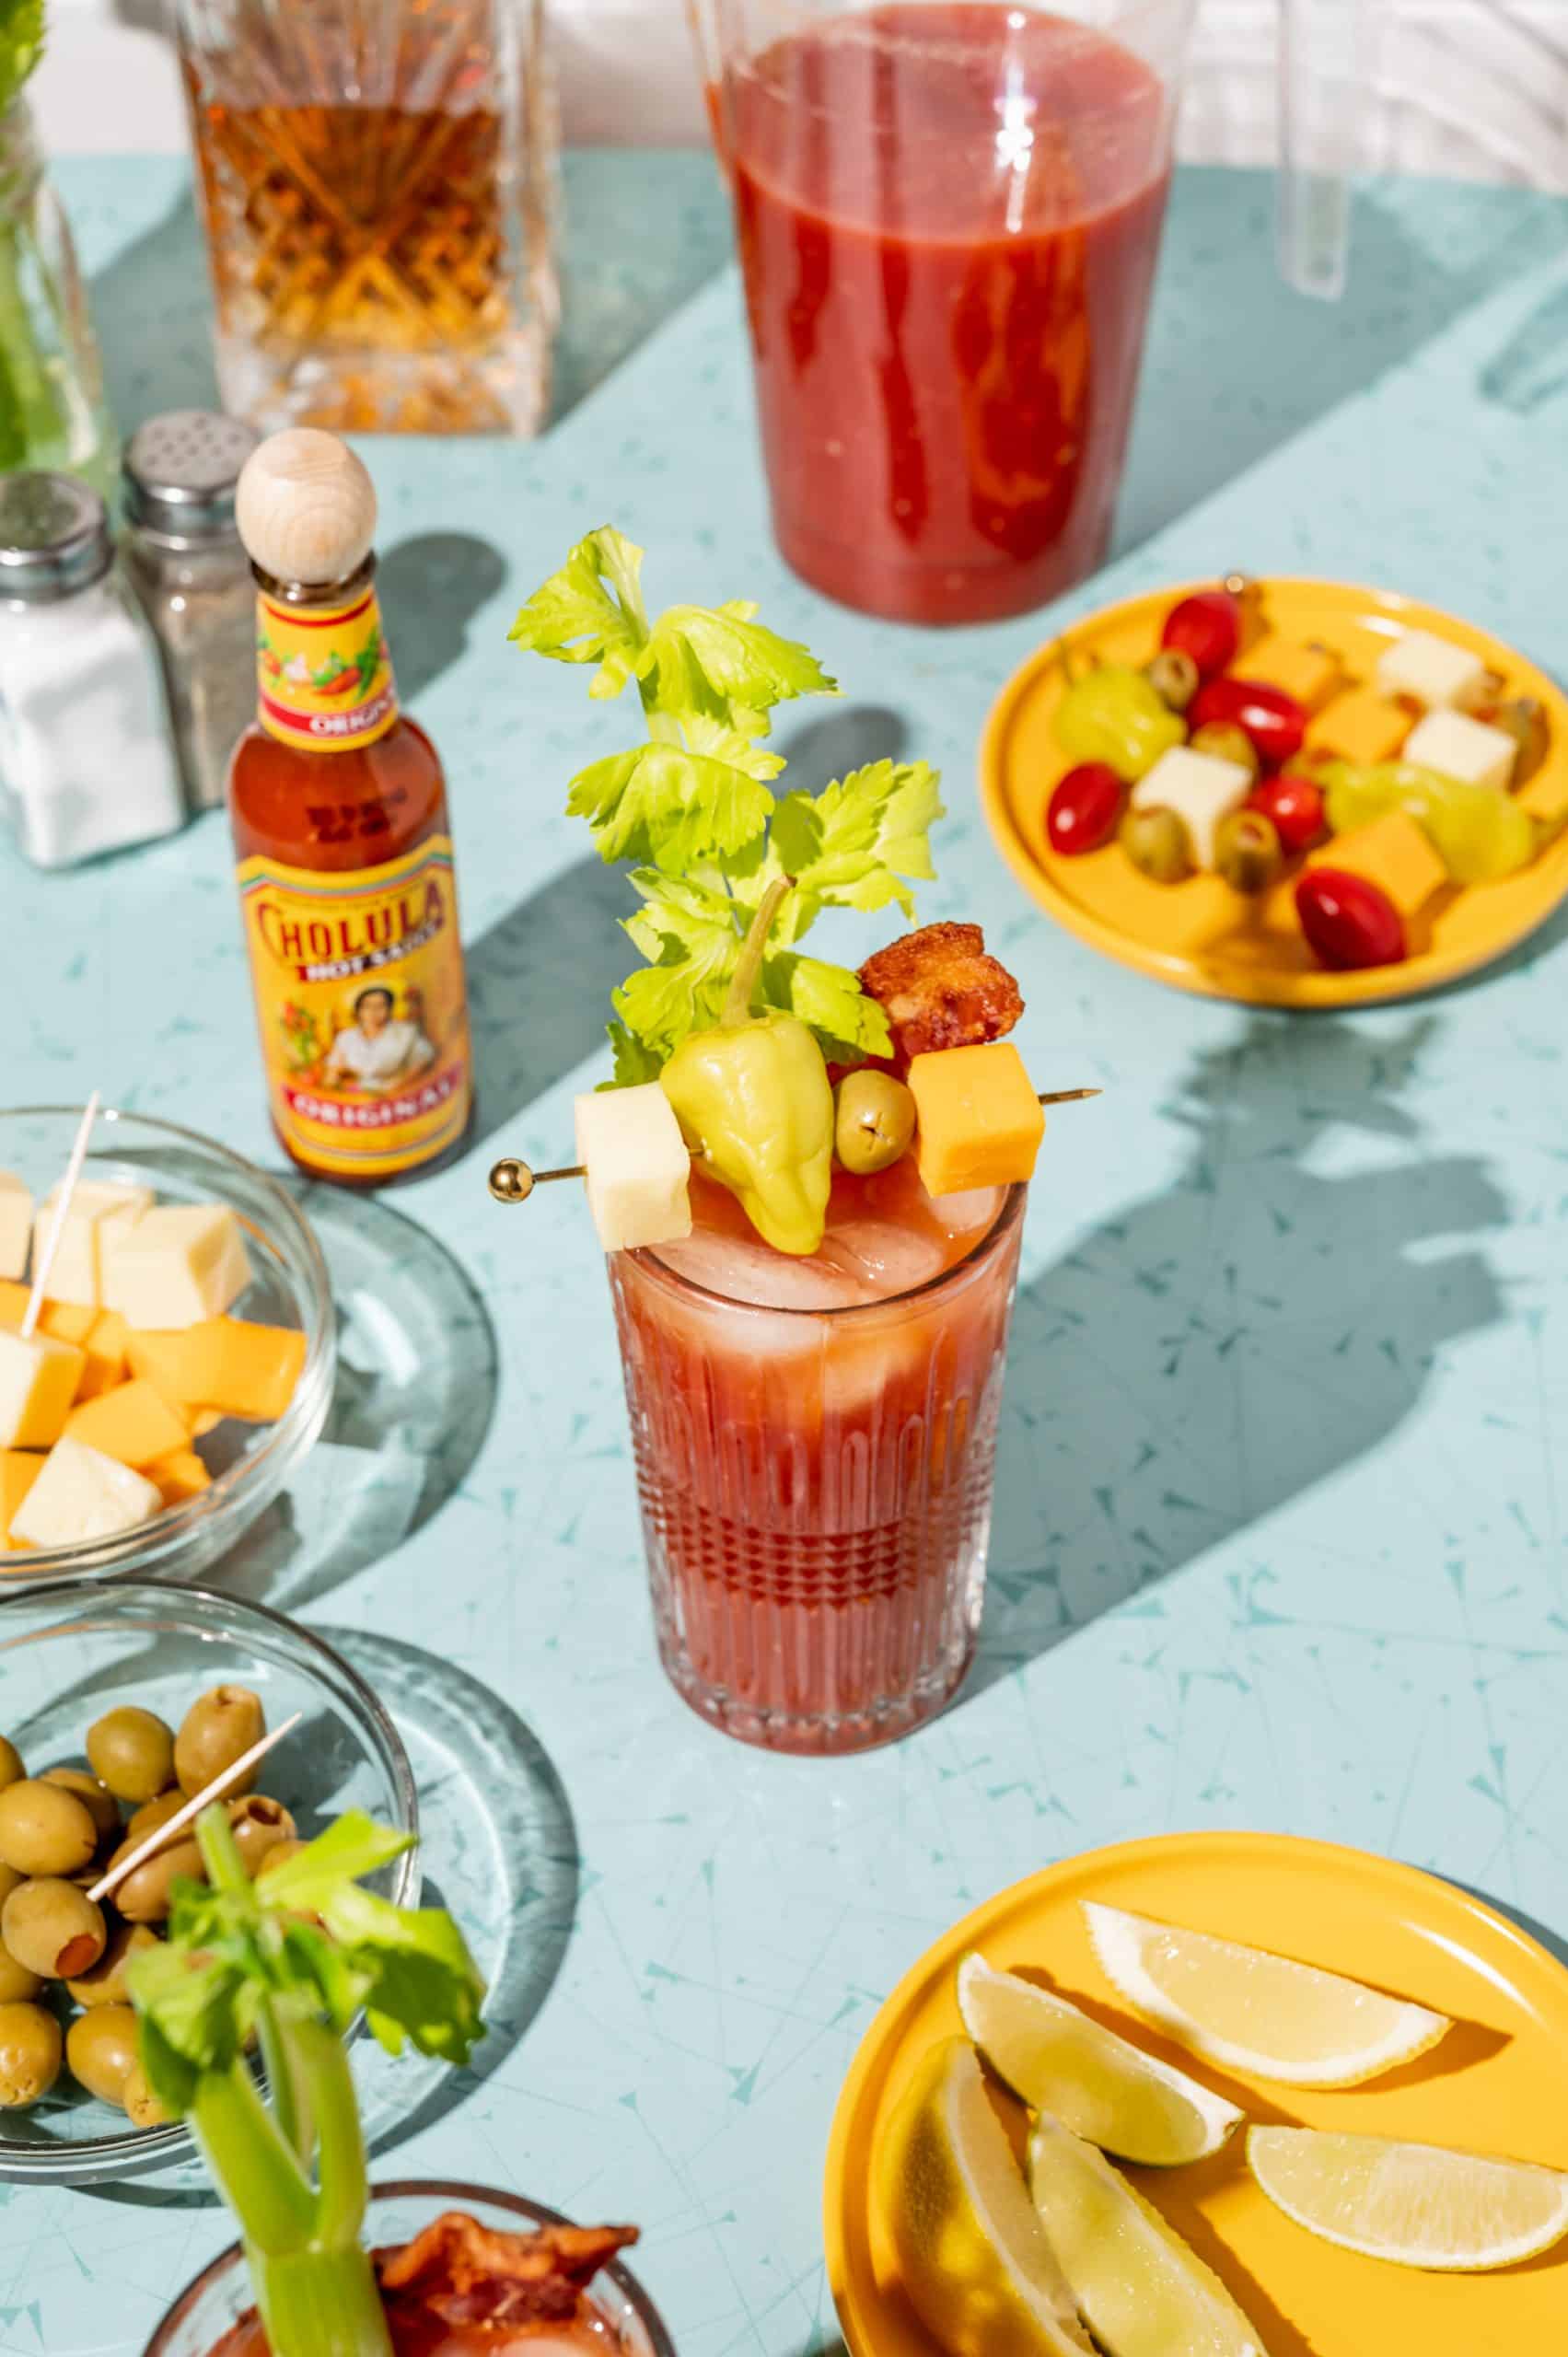 A bloody mary with a strip of bacon, celery, and a cocktail pick with more garnishes